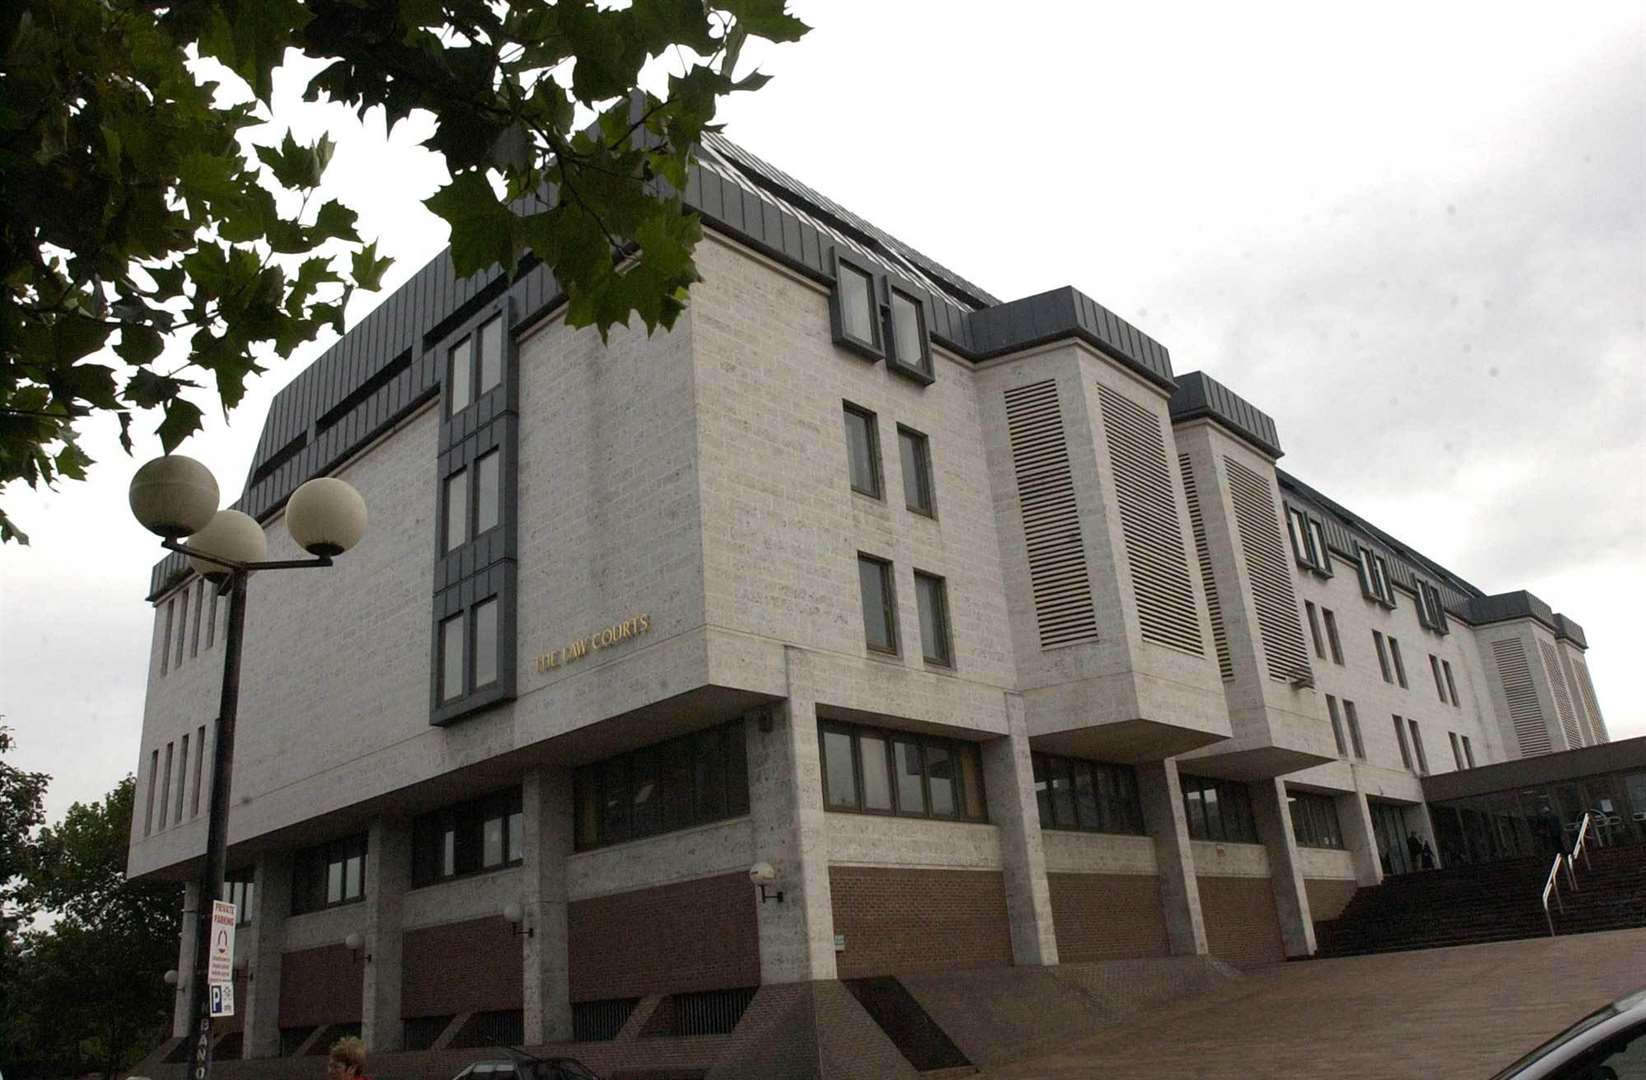 The judge at Maidstone Crown Court placed Cano on a sex offenders register indefinitely